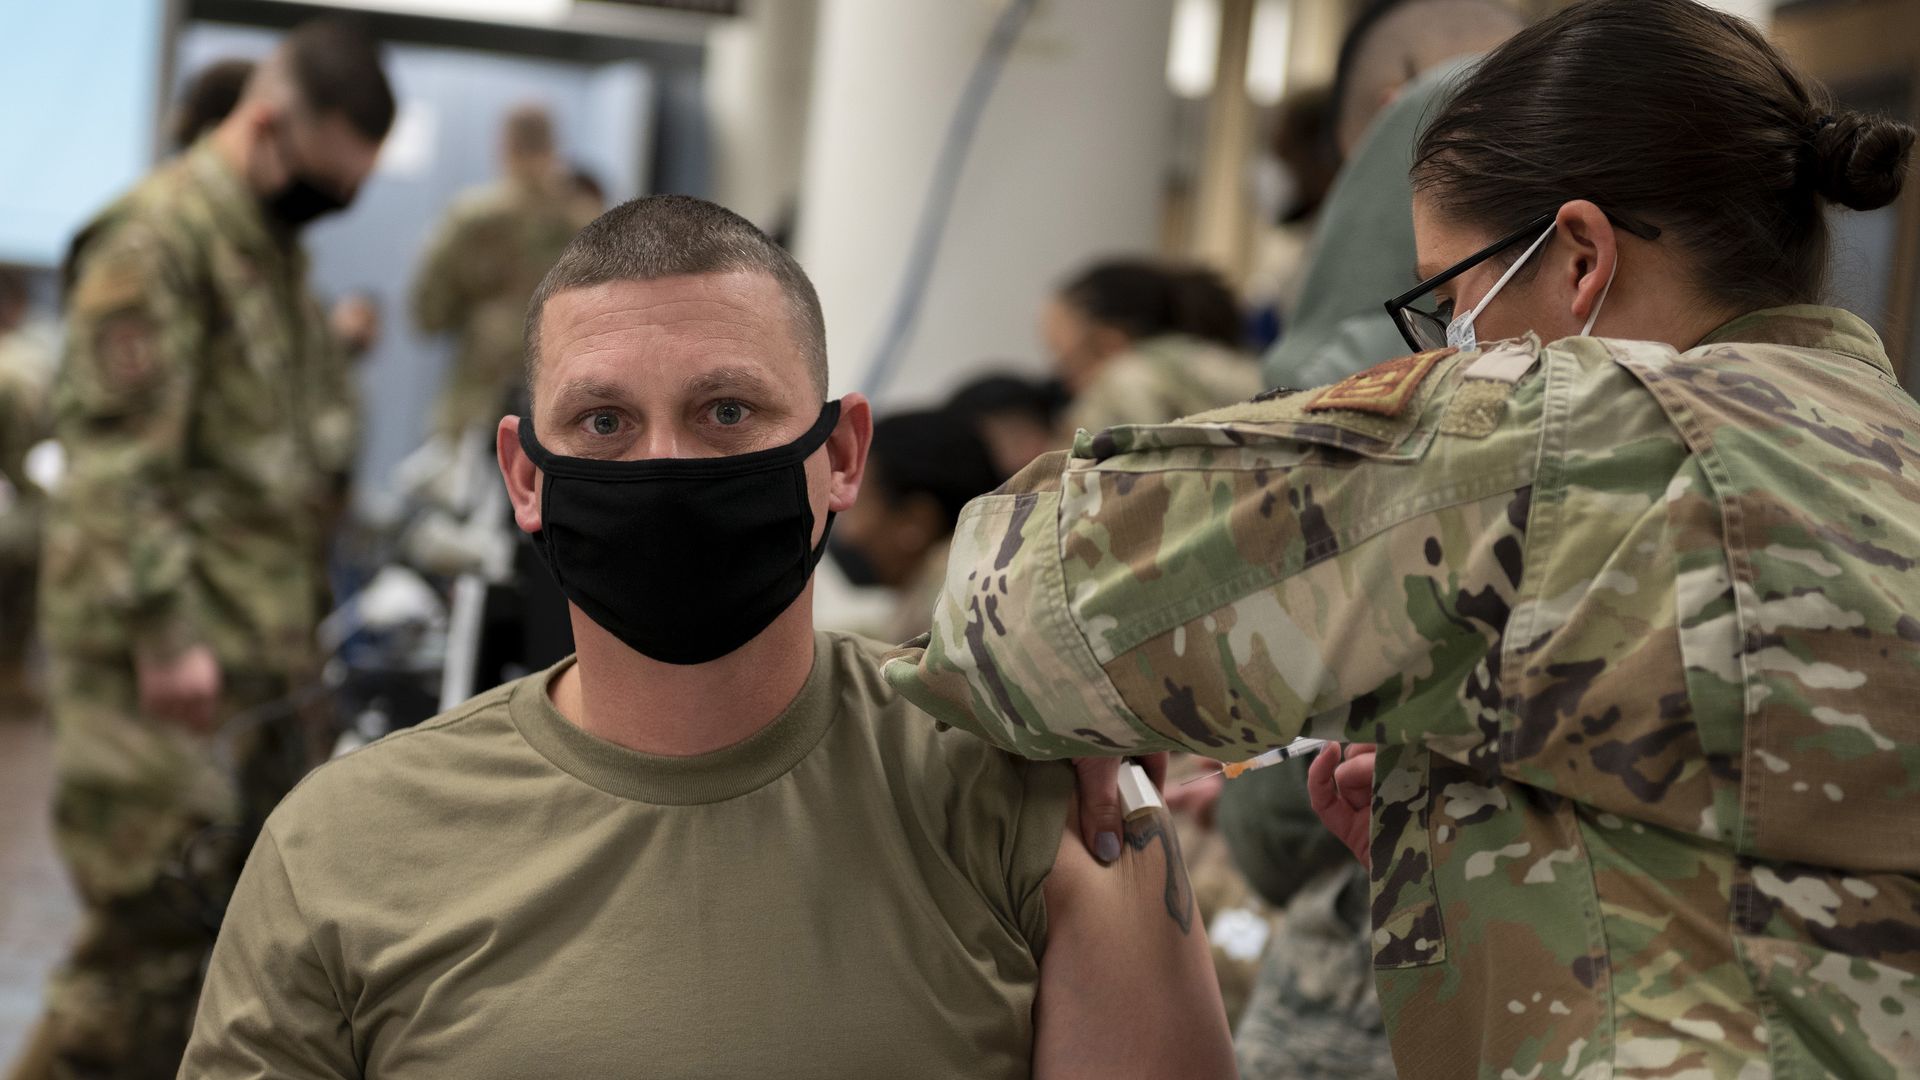 U.S. Air Force Sgt. receives a dose of the COVID-19 vaccine at Osan Air Base 